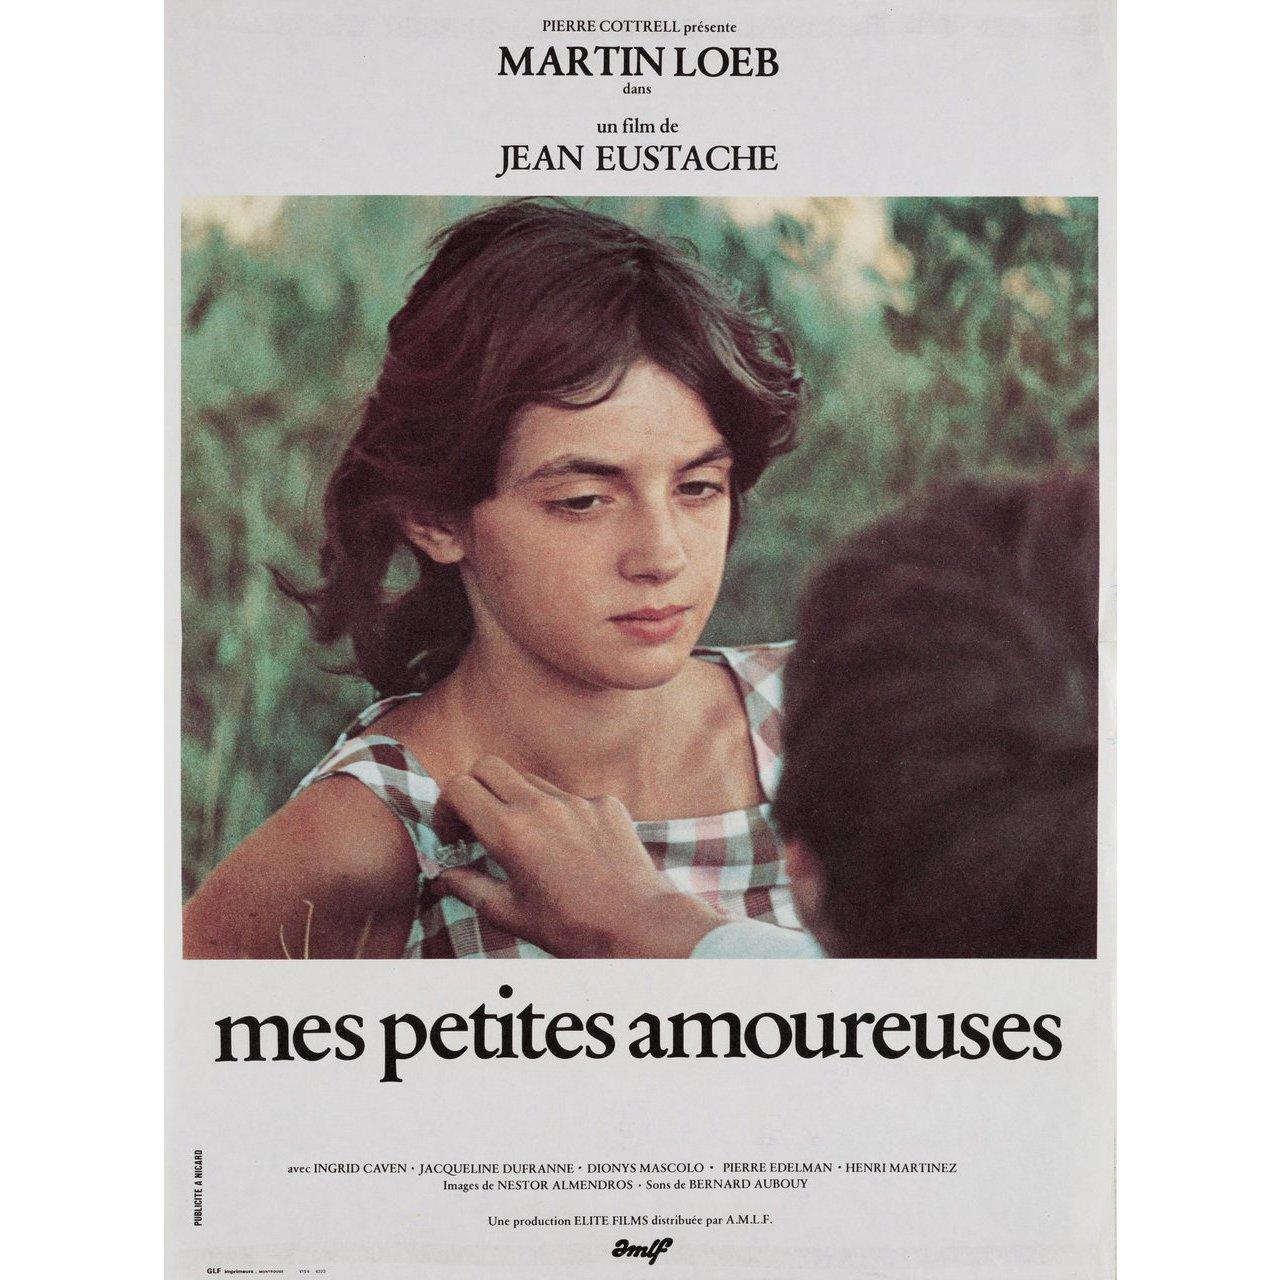 Original 1974 French petite poster for the film Mes Petites Amoureuses directed by Jean Eustache with Martin Loeb / Jacqueline Dufranne / Jacques Romain. Very Good-Fine condition, folded. Many original posters were issued folded or were subsequently